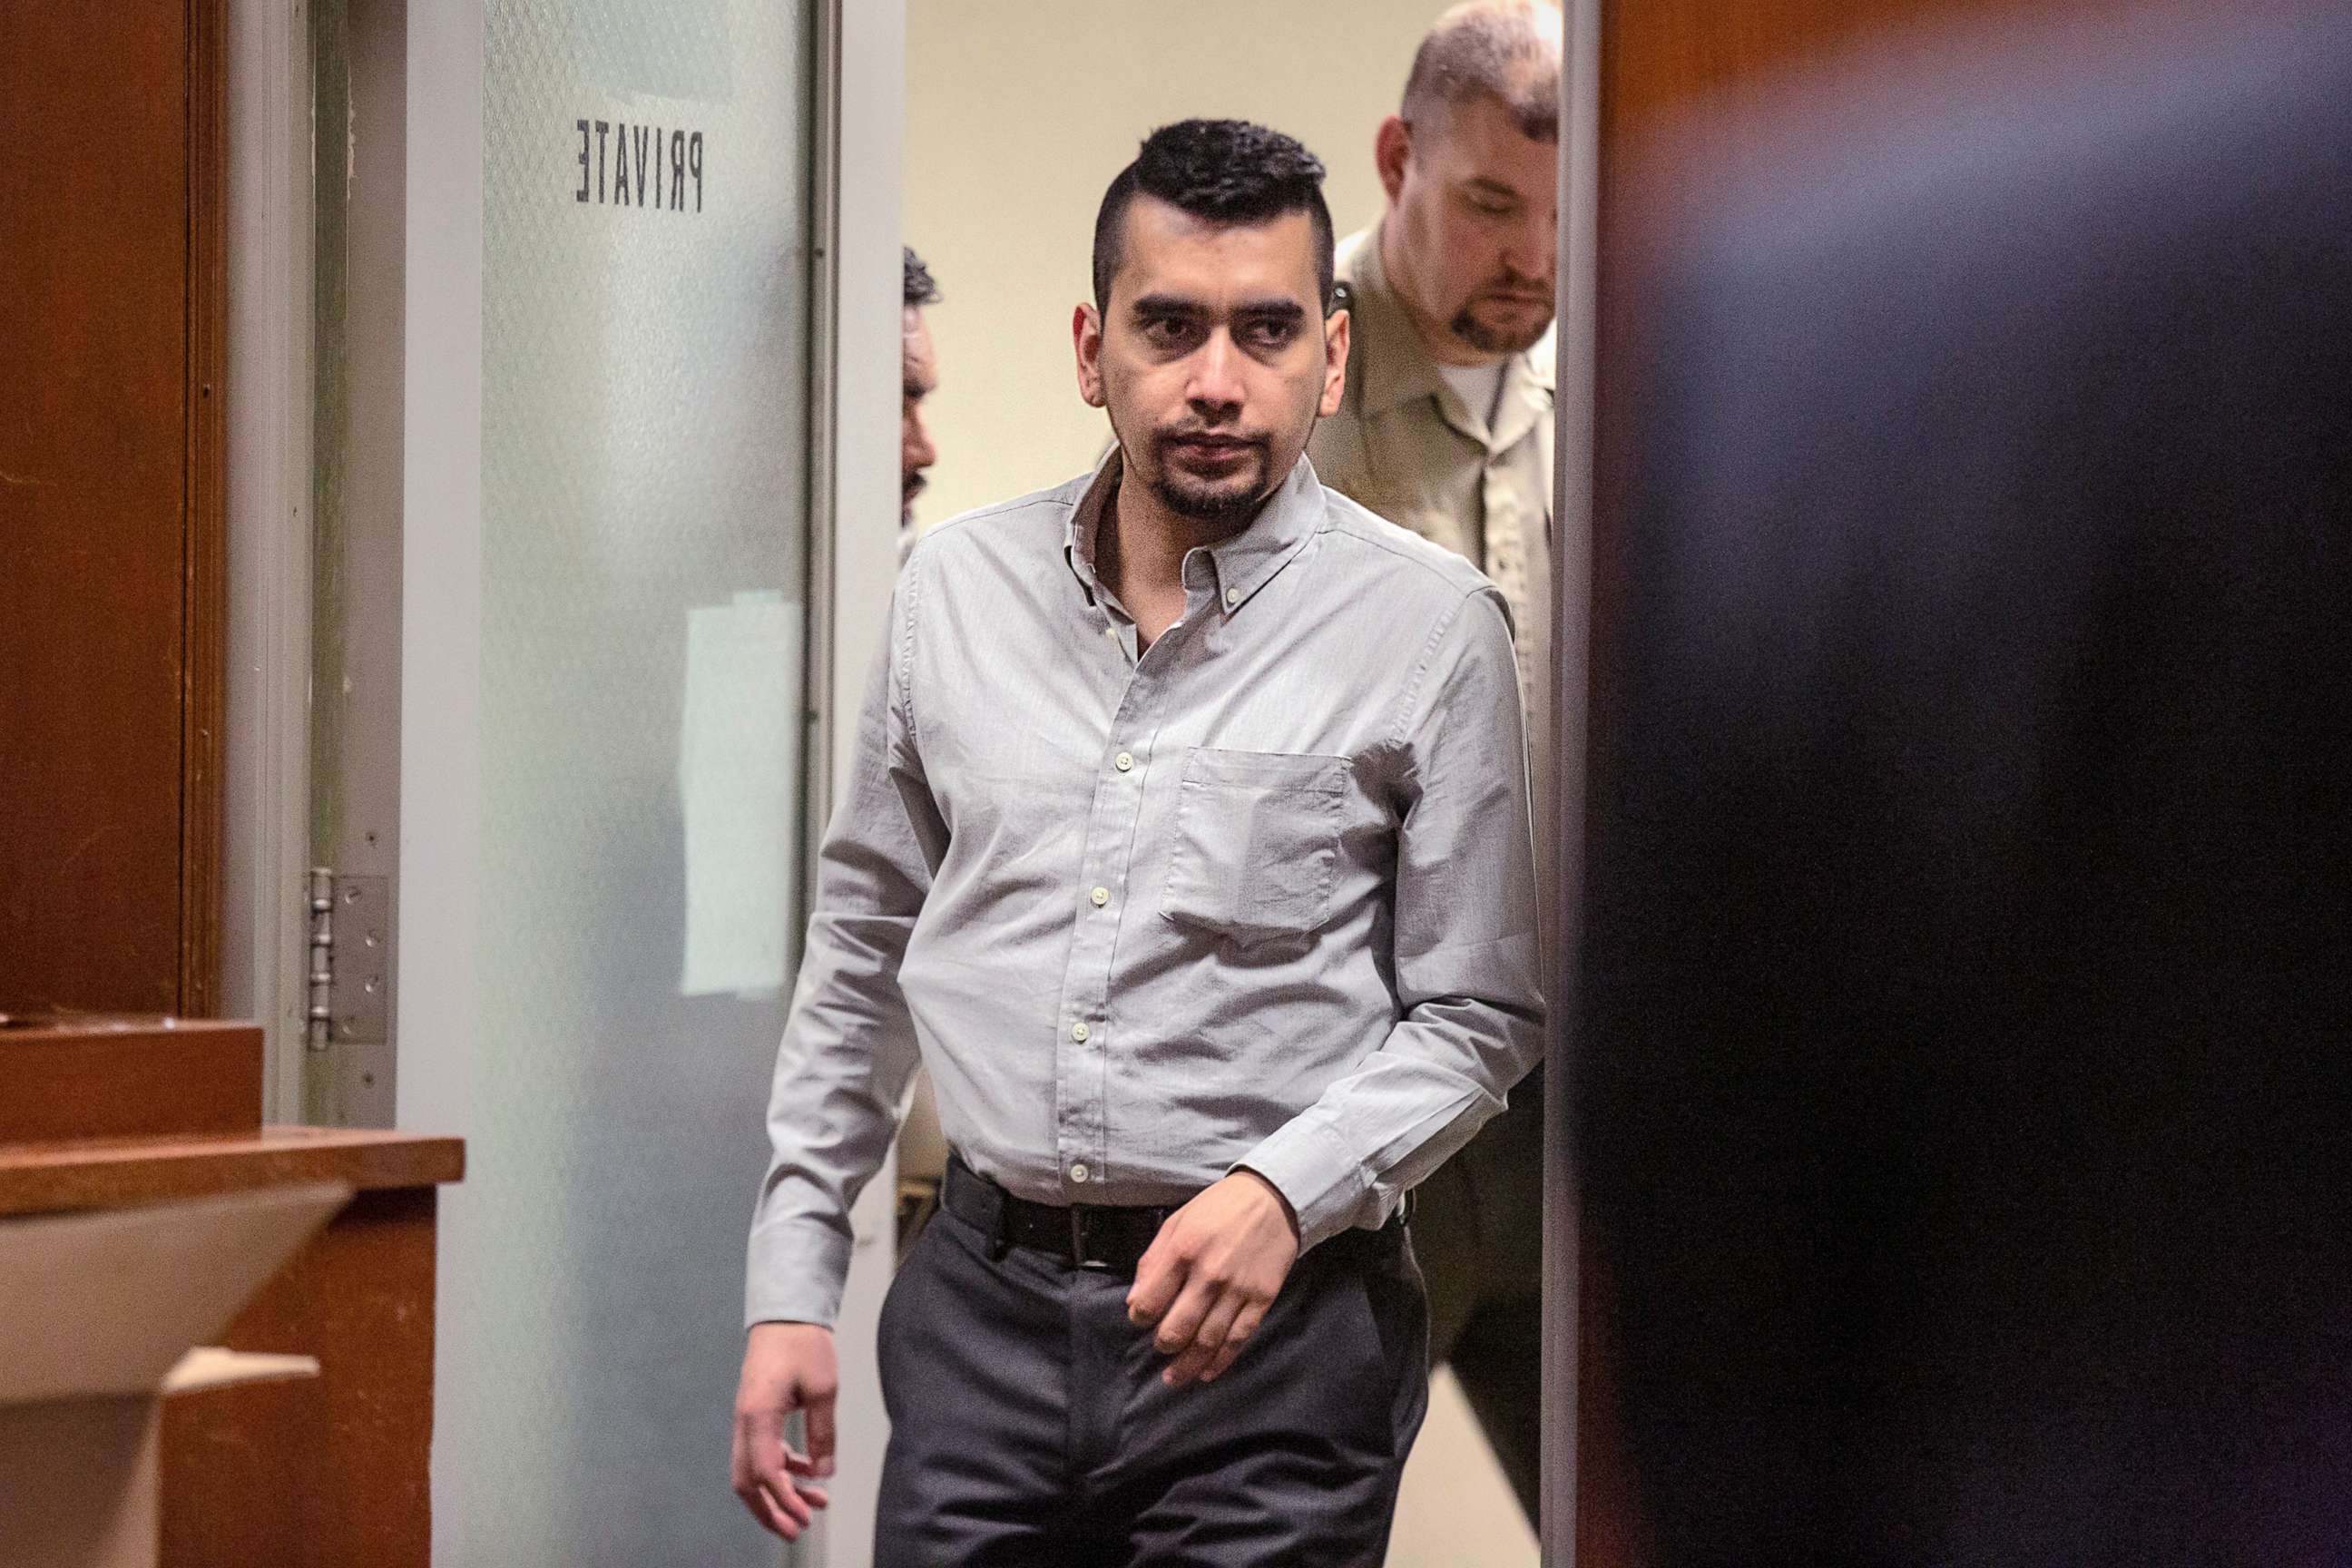 PHOTO: Cristhian Bahena Rivera enters the courtroom following a break, May 24, 2021, in the Scott County Courthouse, in Davenport, Iowa. Bahena Rivera is on trial after being charged with first degree murder in the death of Mollie Tibbetts in July 2018.